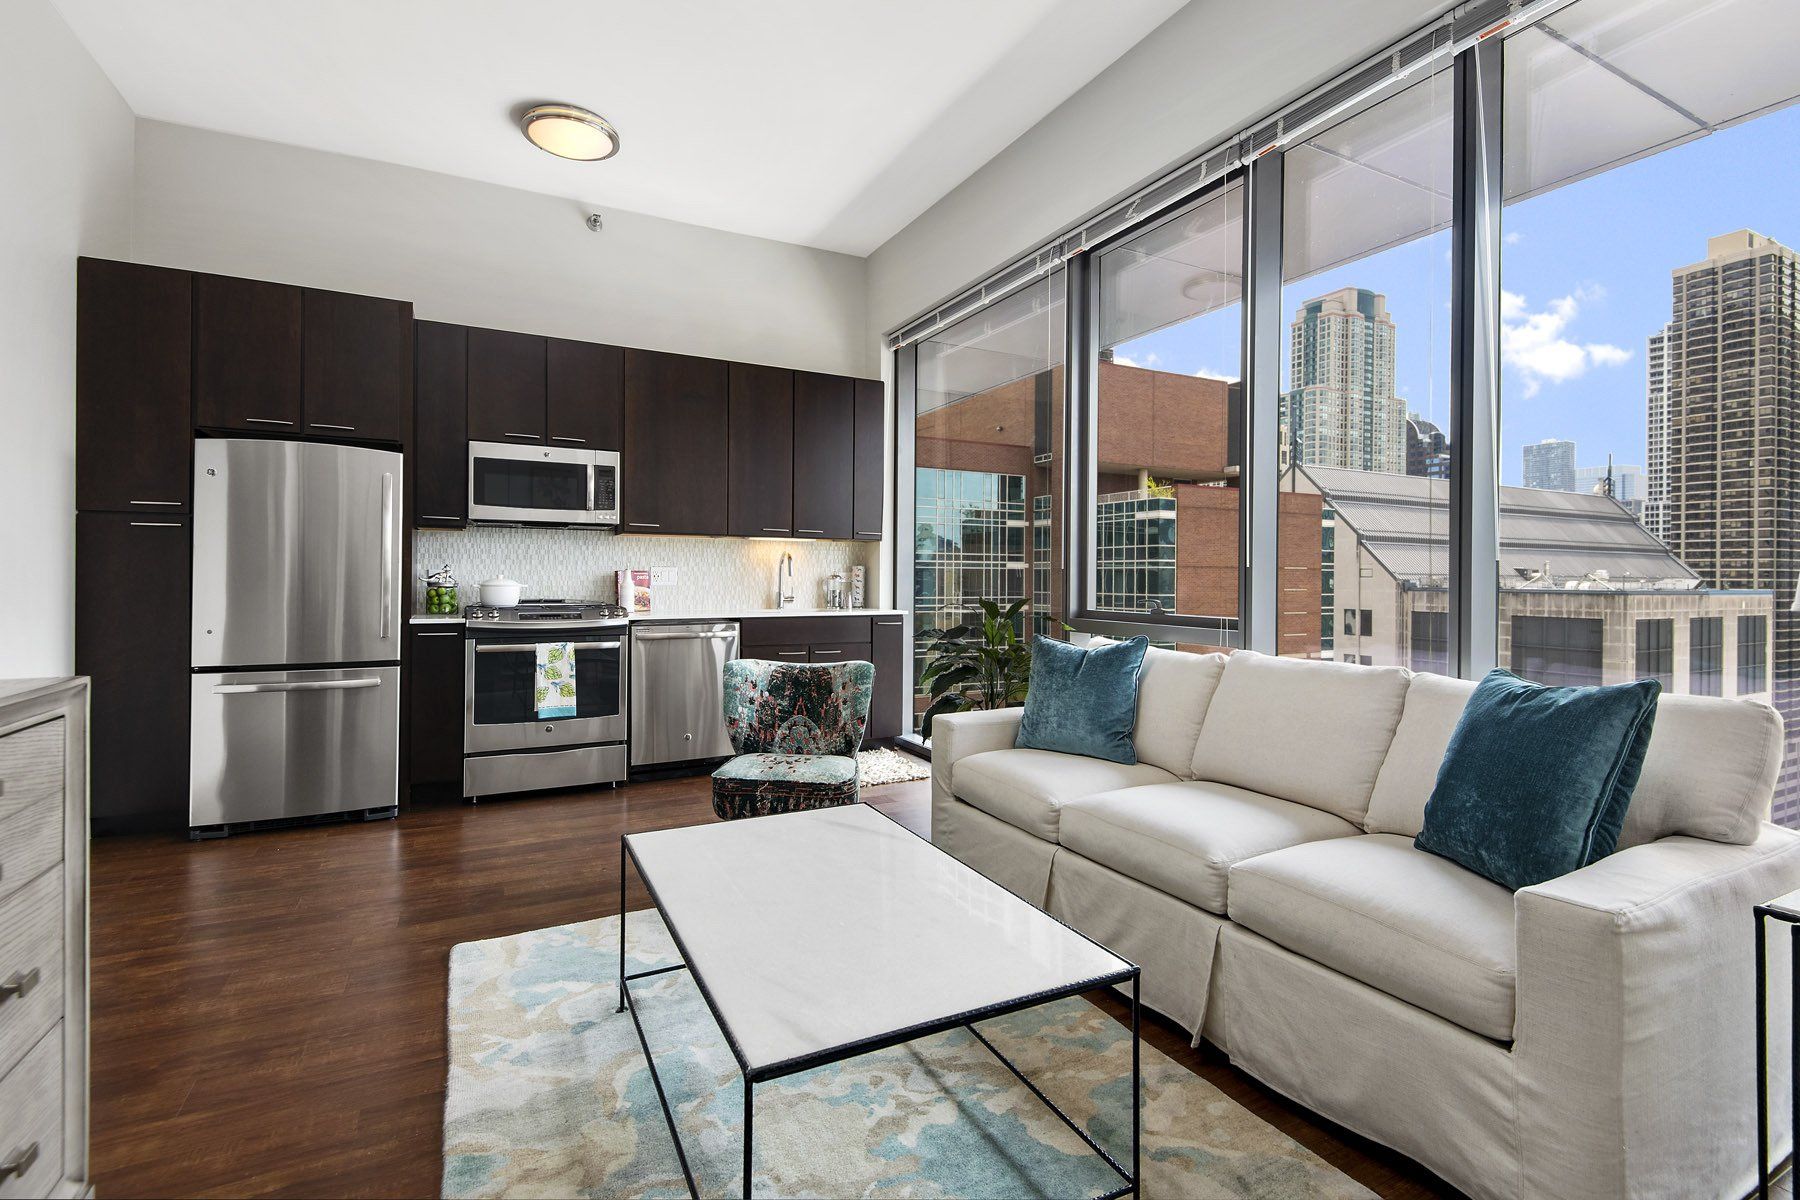 Apartment with white couch and stainless steel kitchen appliances at State & Chestnut